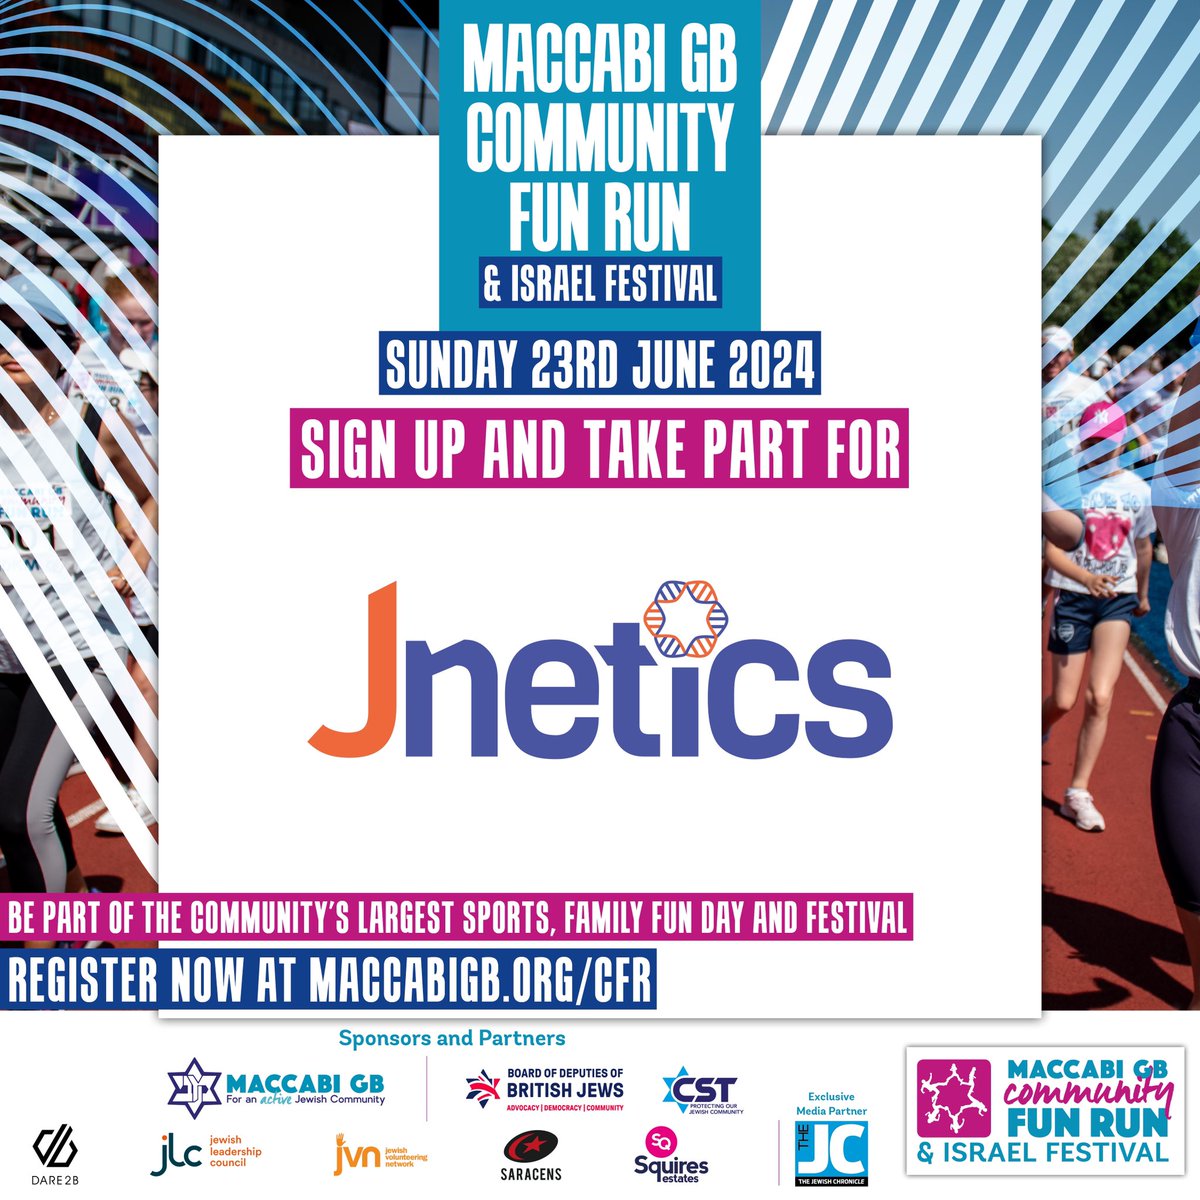 We’re excited to be participating in this years Maccabi GB Community Fun Run & Israel Festival taking place on Sunday 23rd June 2024. Sign up for team Jnetics and raise vital funds to enable us to continue to offer our education and life saving work🏃🏻‍♂️#maccabifunrun #teamjnetics